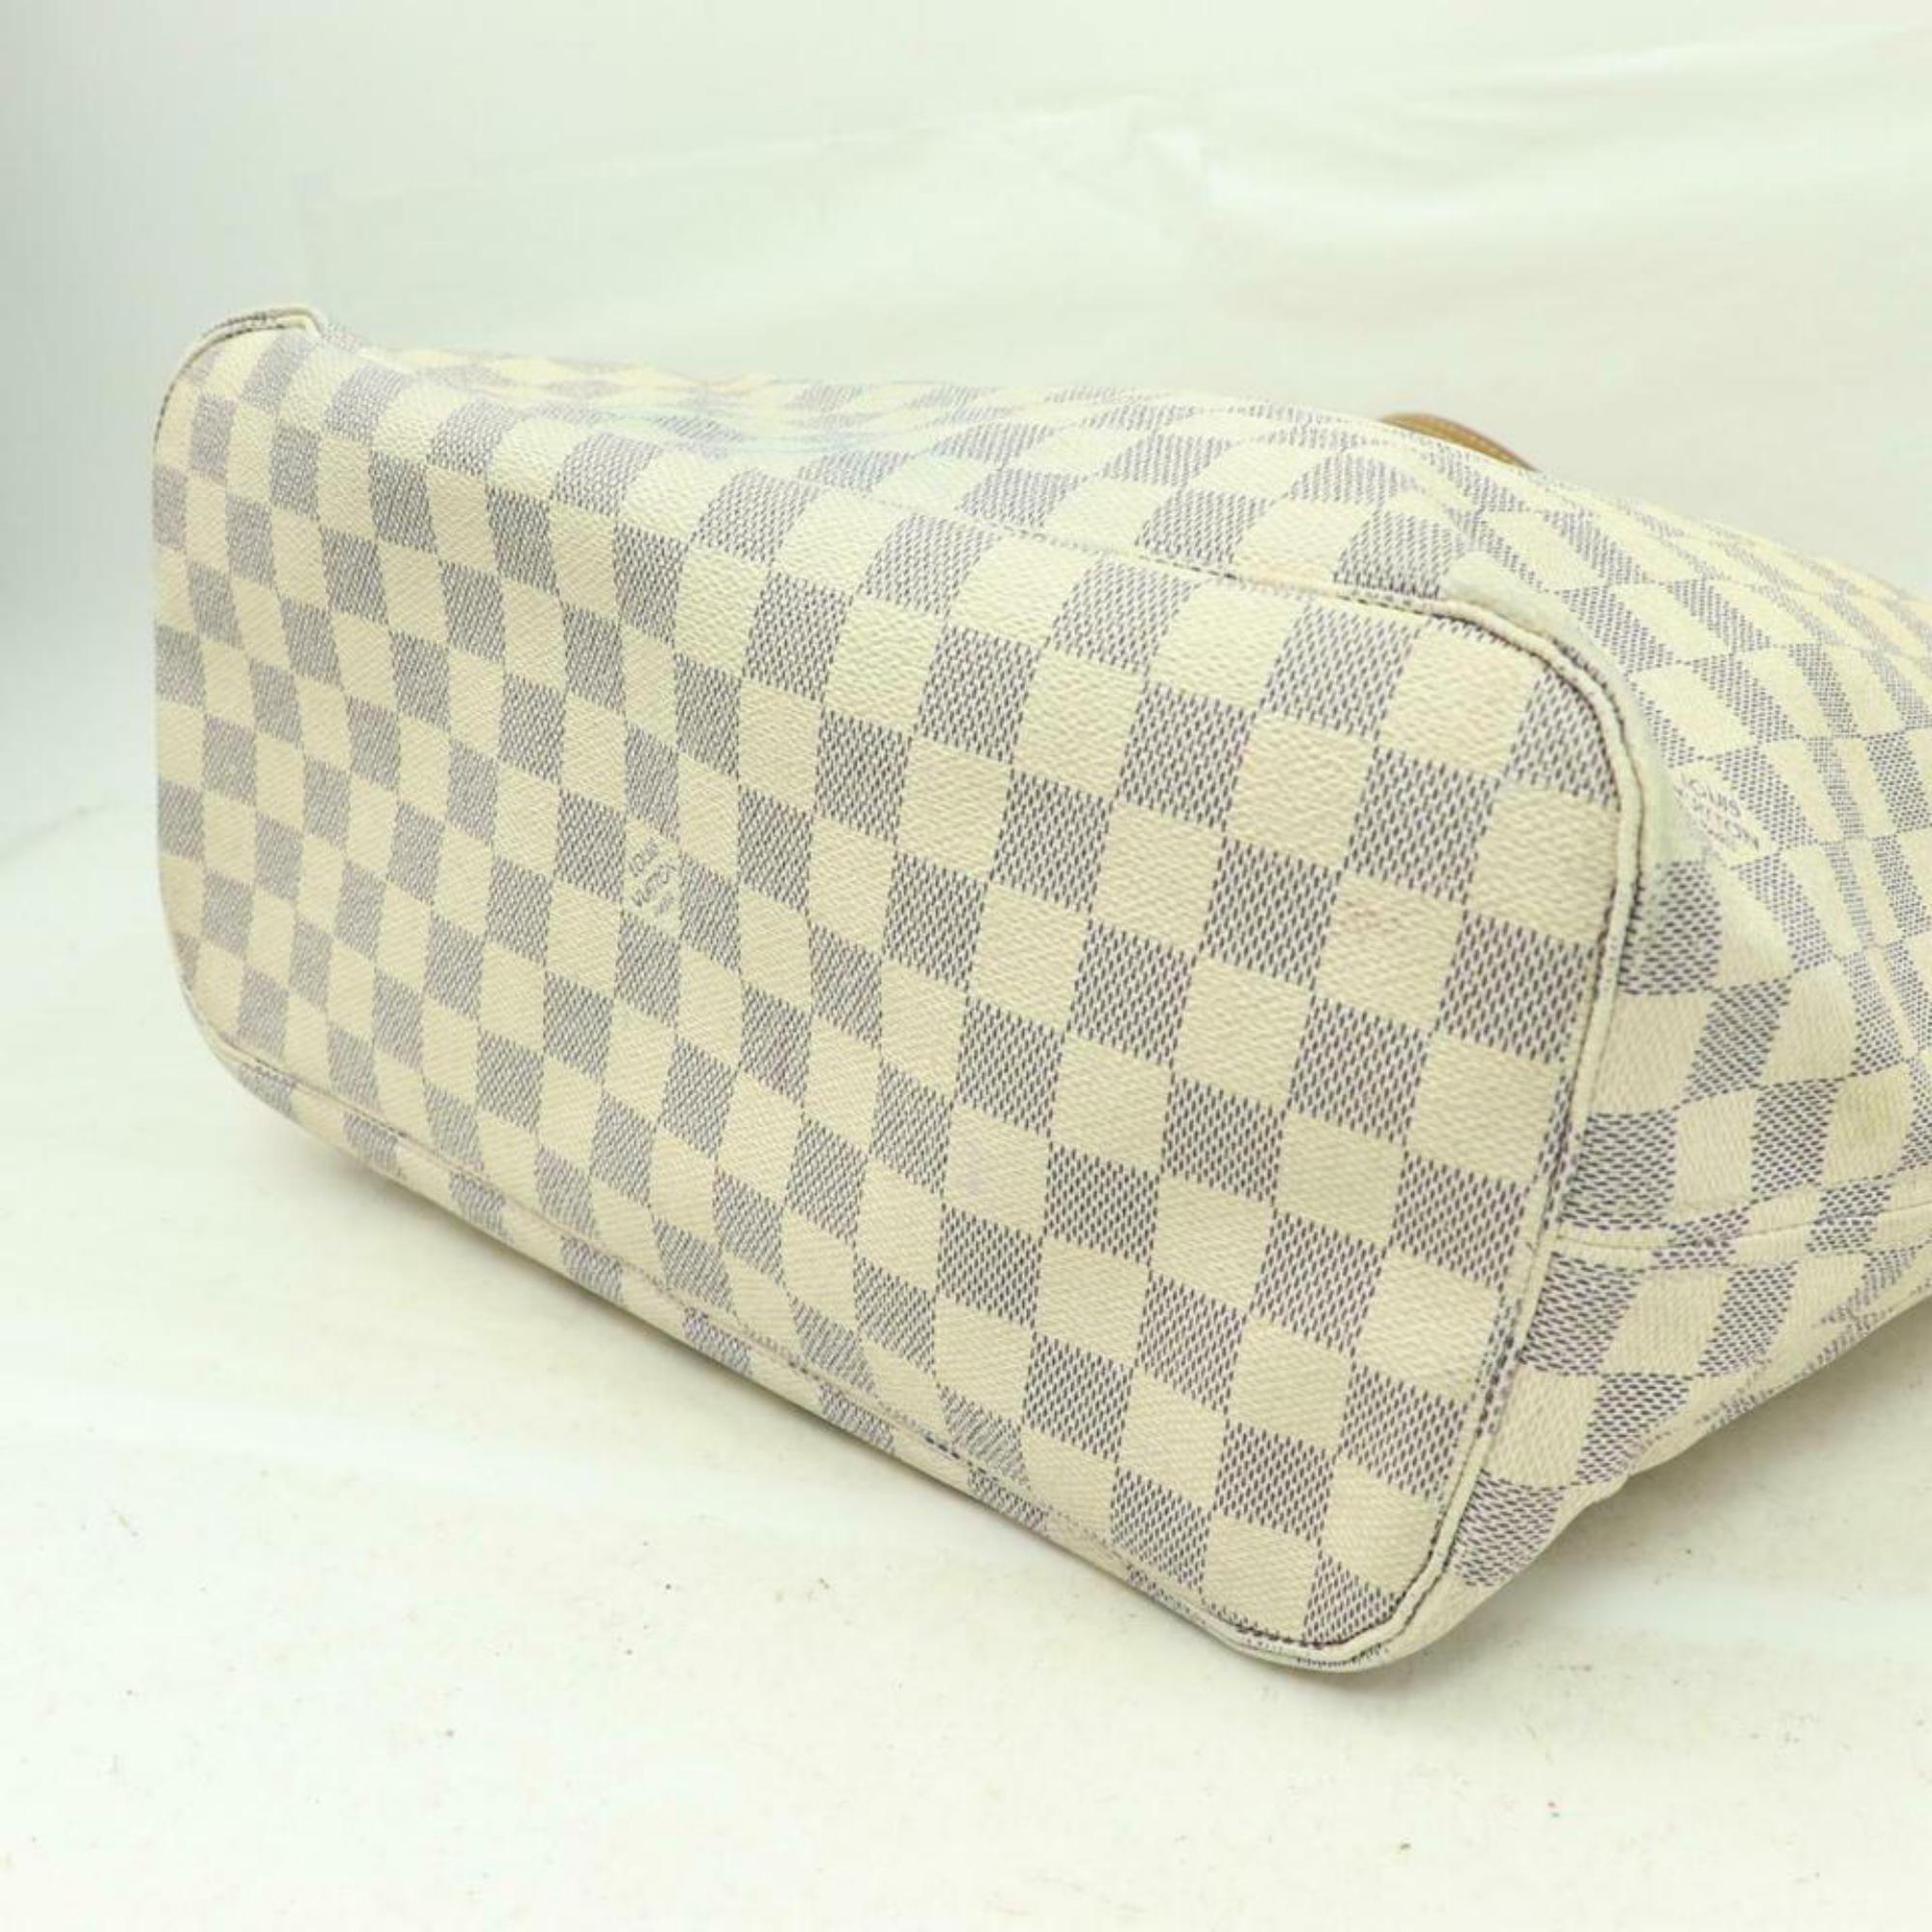 Louis Vuitton Neverfull Damier Azur Mm Medium 870317 White Coated Canvas Tote For Sale 2